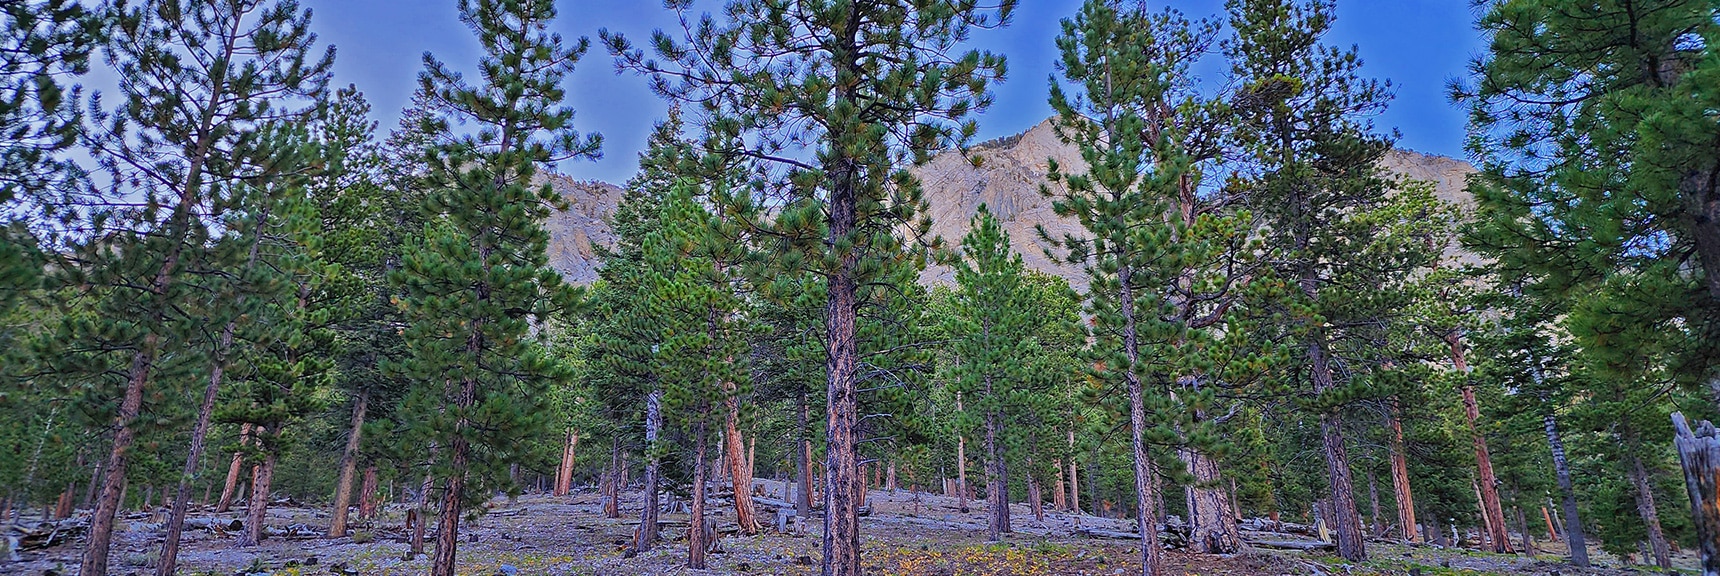 Heading Straight Up Put Me One Wash Too Far North, Missed the Main Wash Approach | Mummy Mountain Head from Lee Canyon Road | Mt Charleston Wilderness | Spring Mountains, Nevada